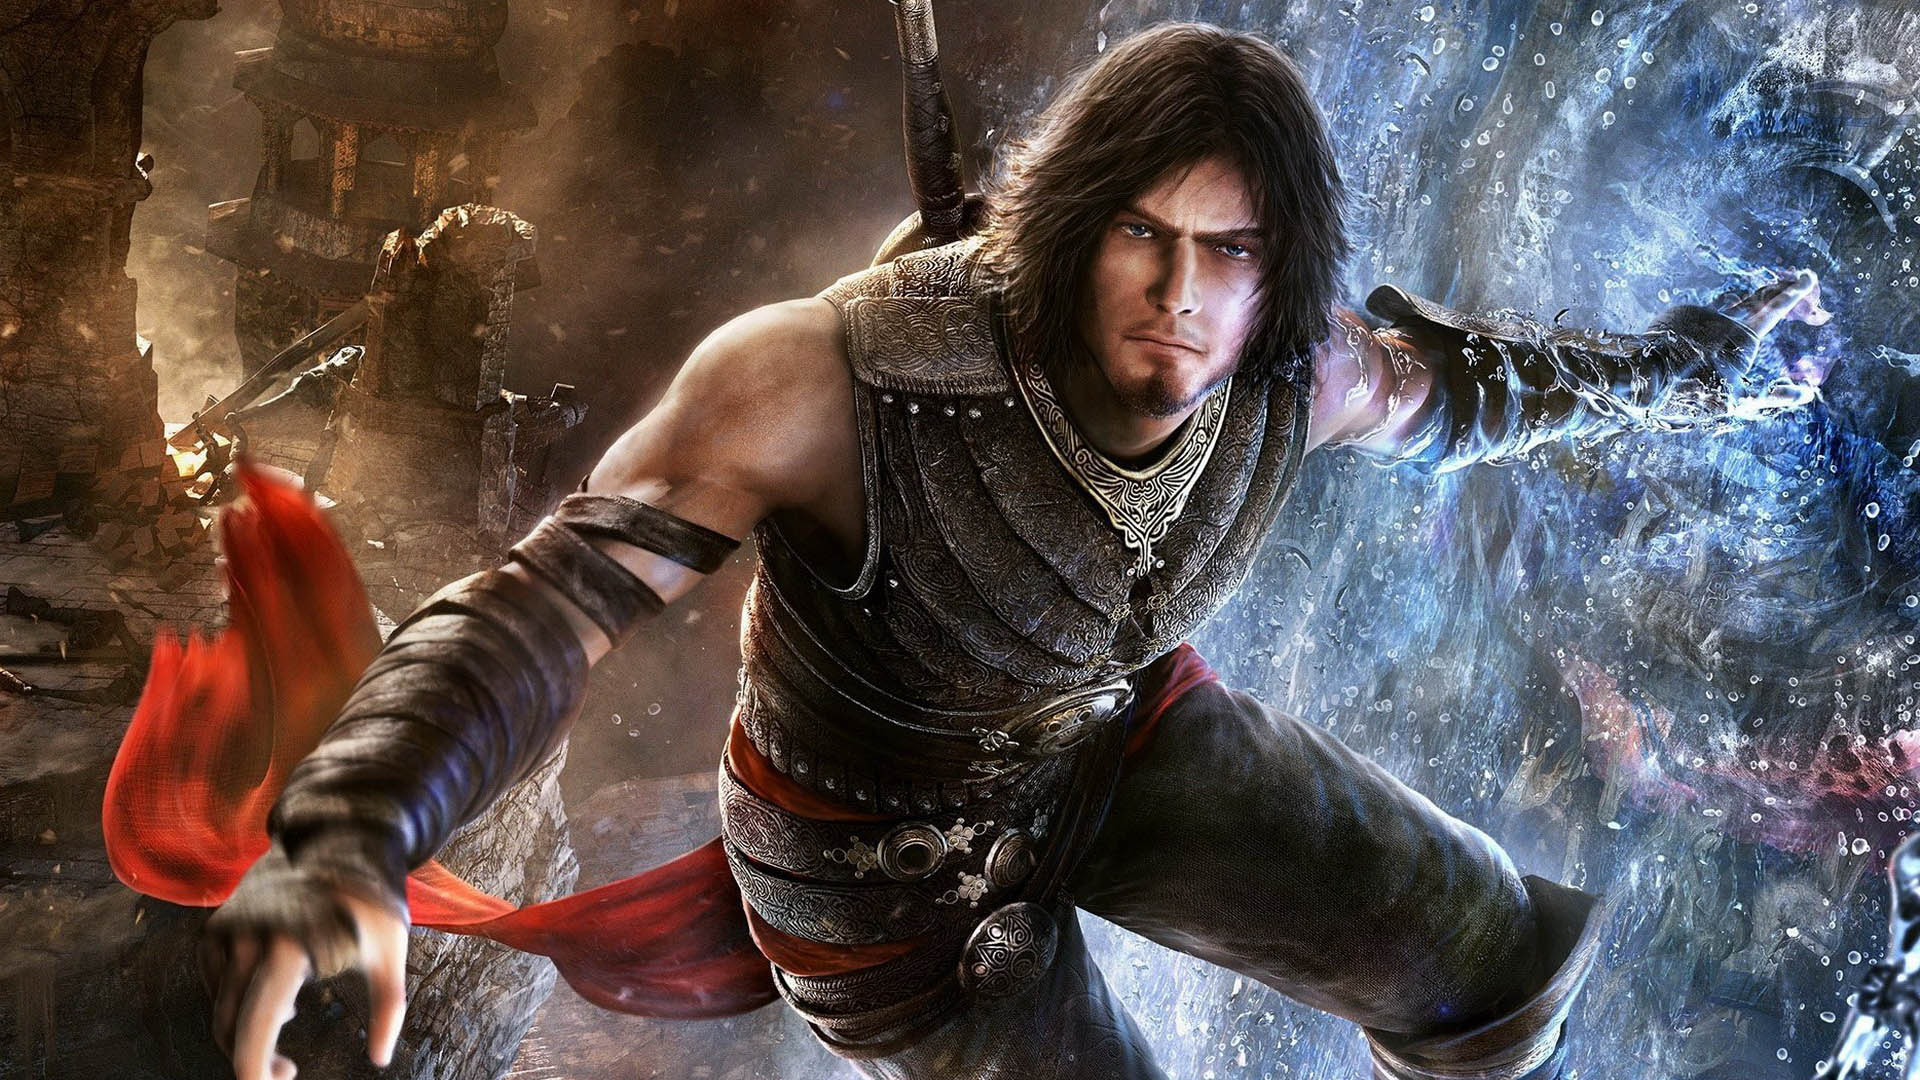 Prince of Persia shows why films based on video games will never work, Science fiction and fantasy films